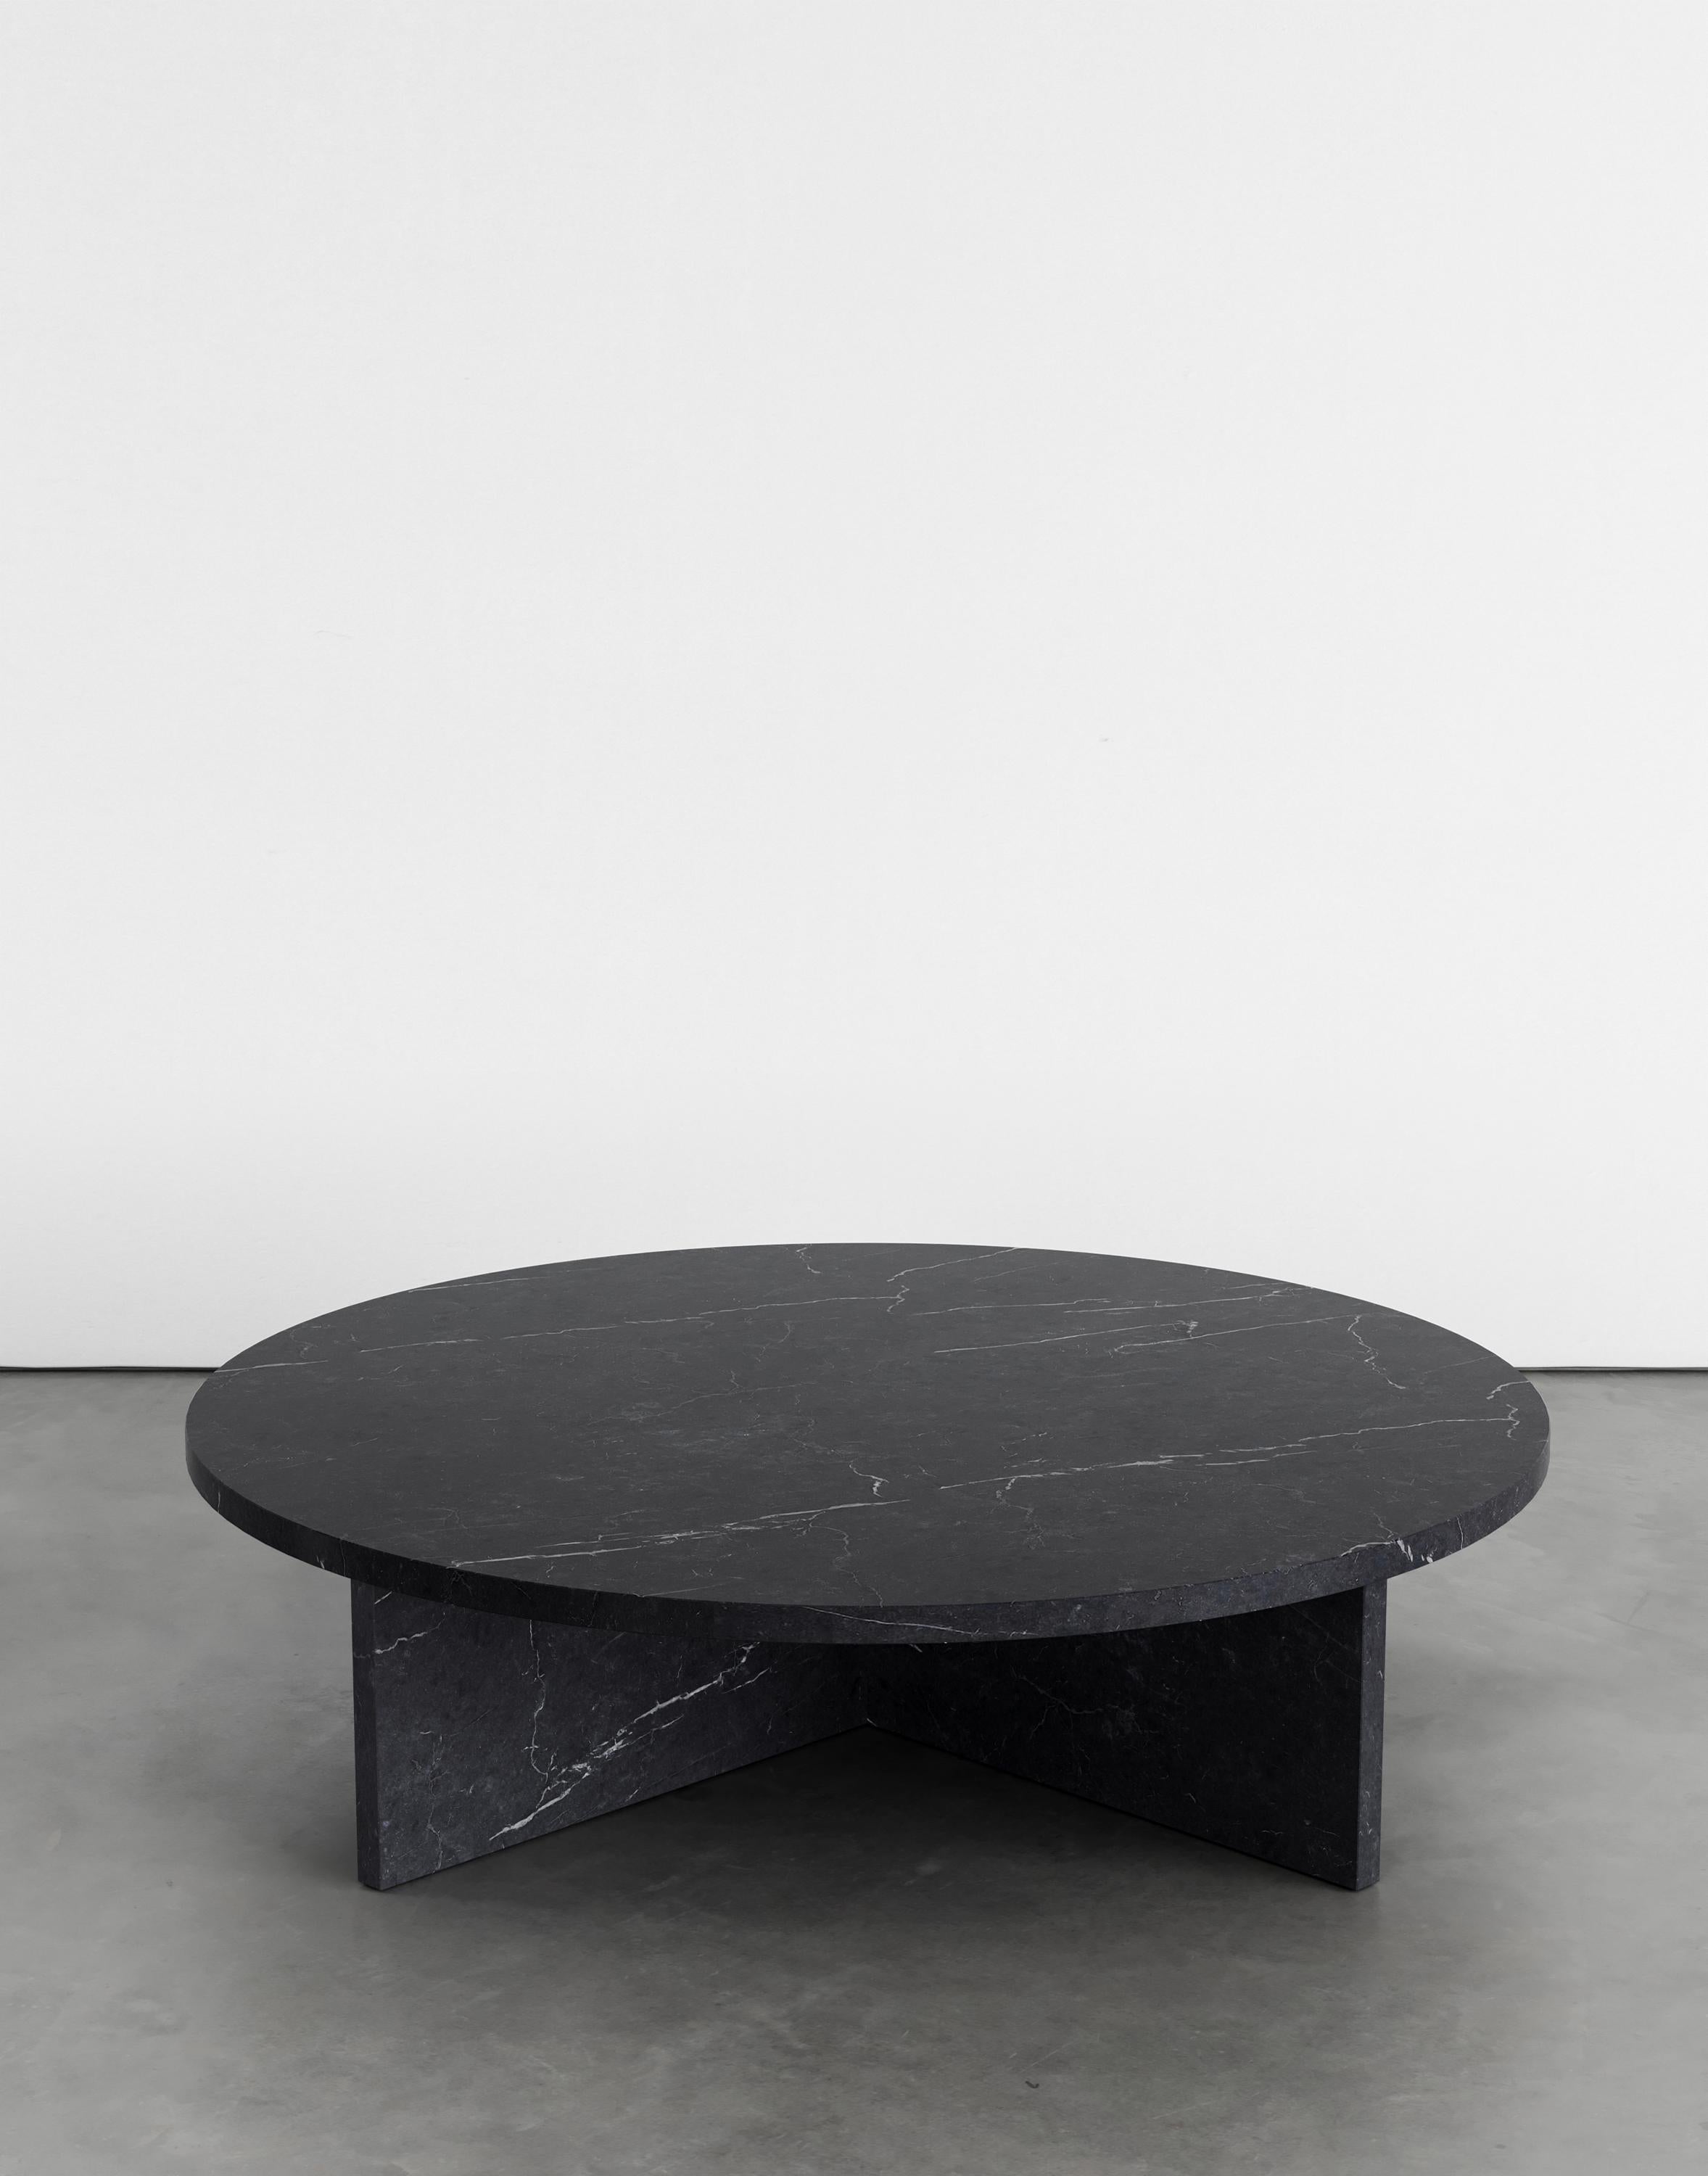 Rosa 120 coffee table by Agglomerati 
Dimensions: W 120 x H 30 cm 
Materials: Black Marquina. Available in other stones. 

Agglomerati is a London-based studio creating distinctive stone furniture. Established in 2019 by Australian designer Sam